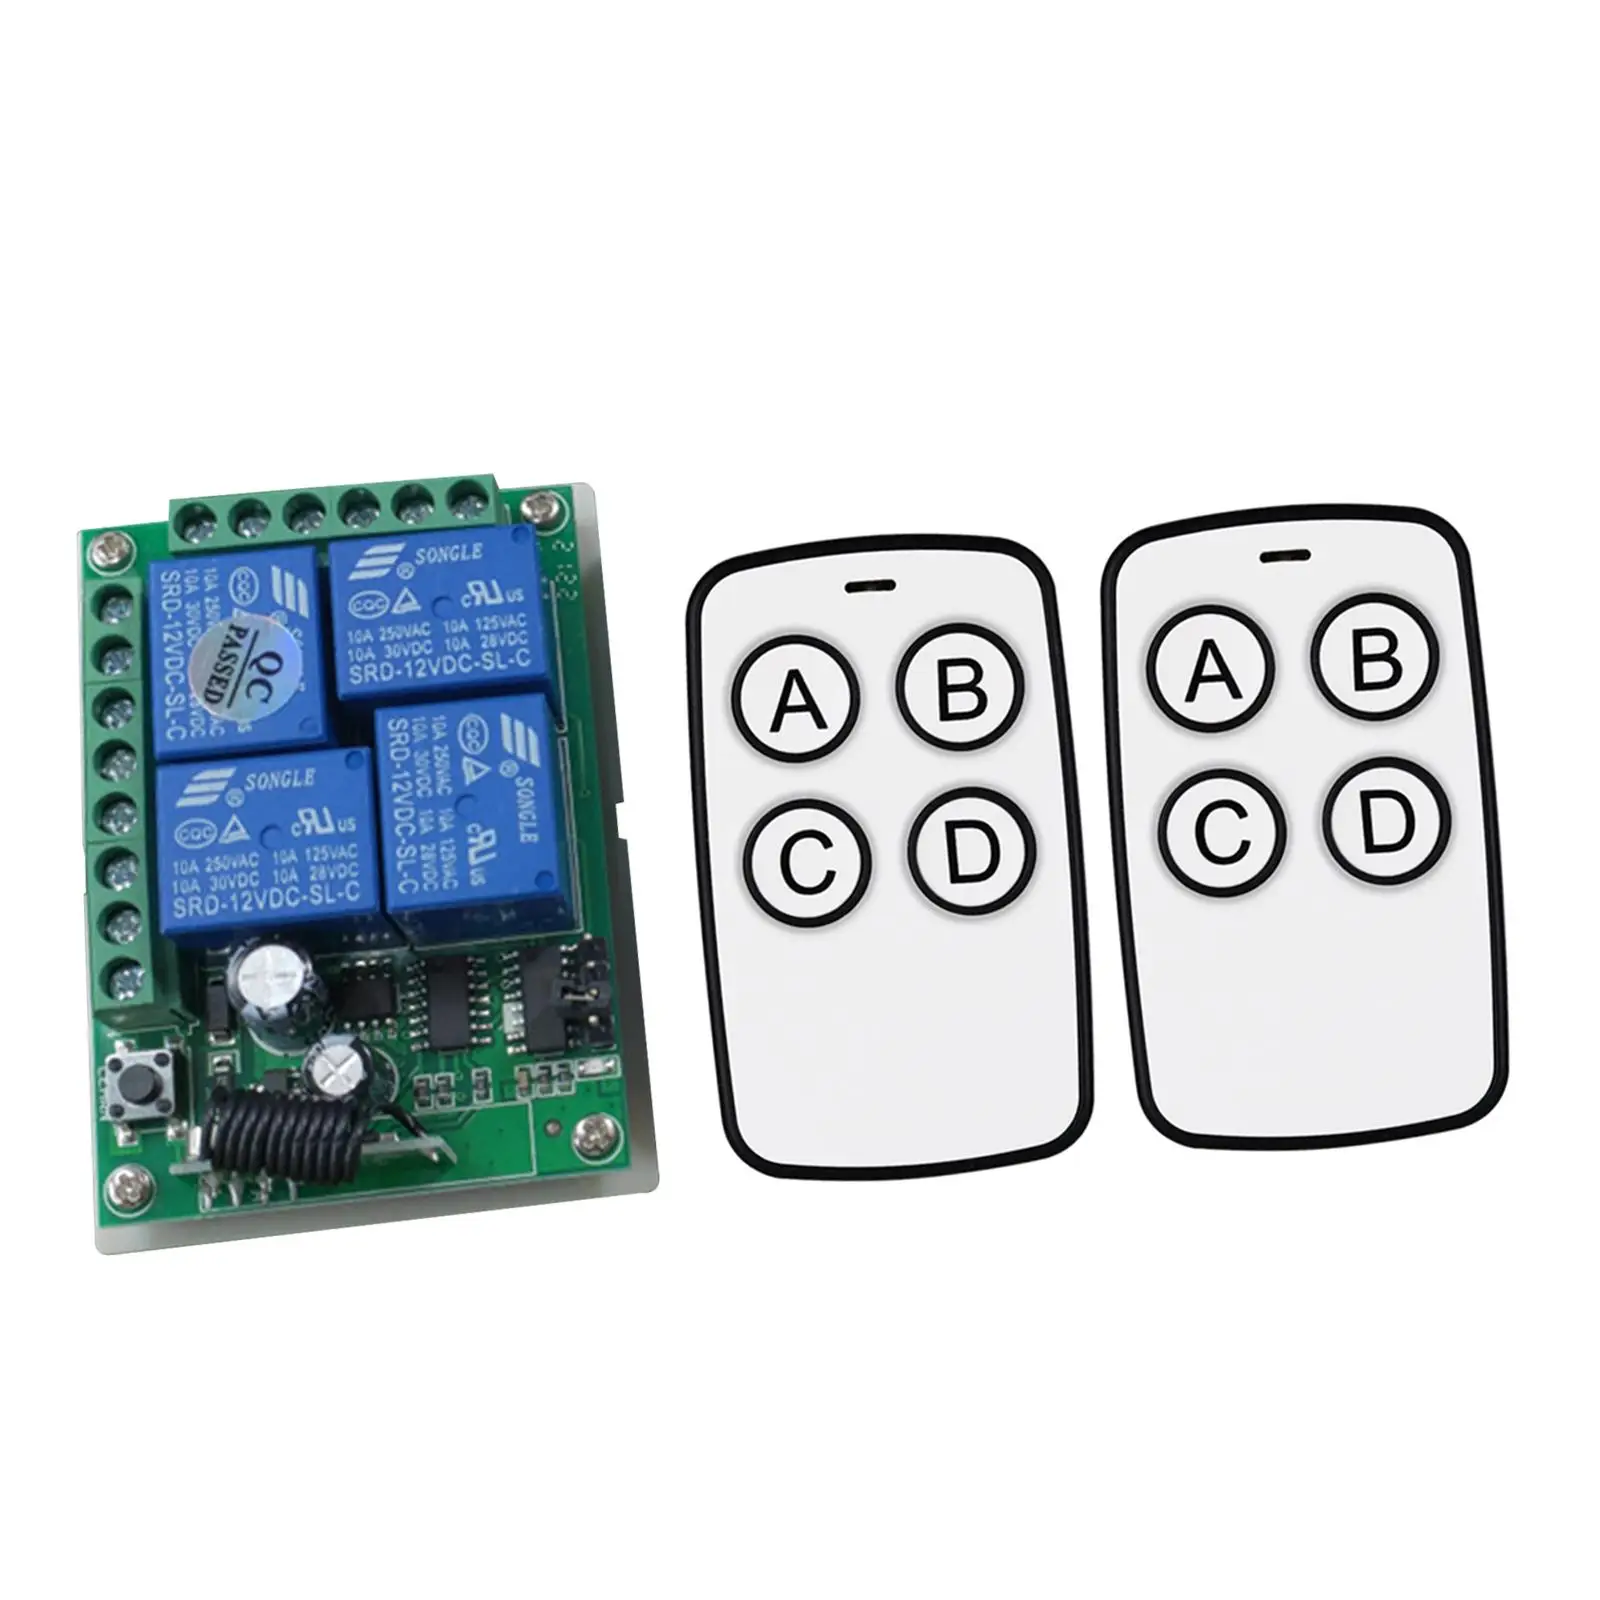 Switch Receiver Remote Switch for Use for Electric Doors Garage Doors Lights